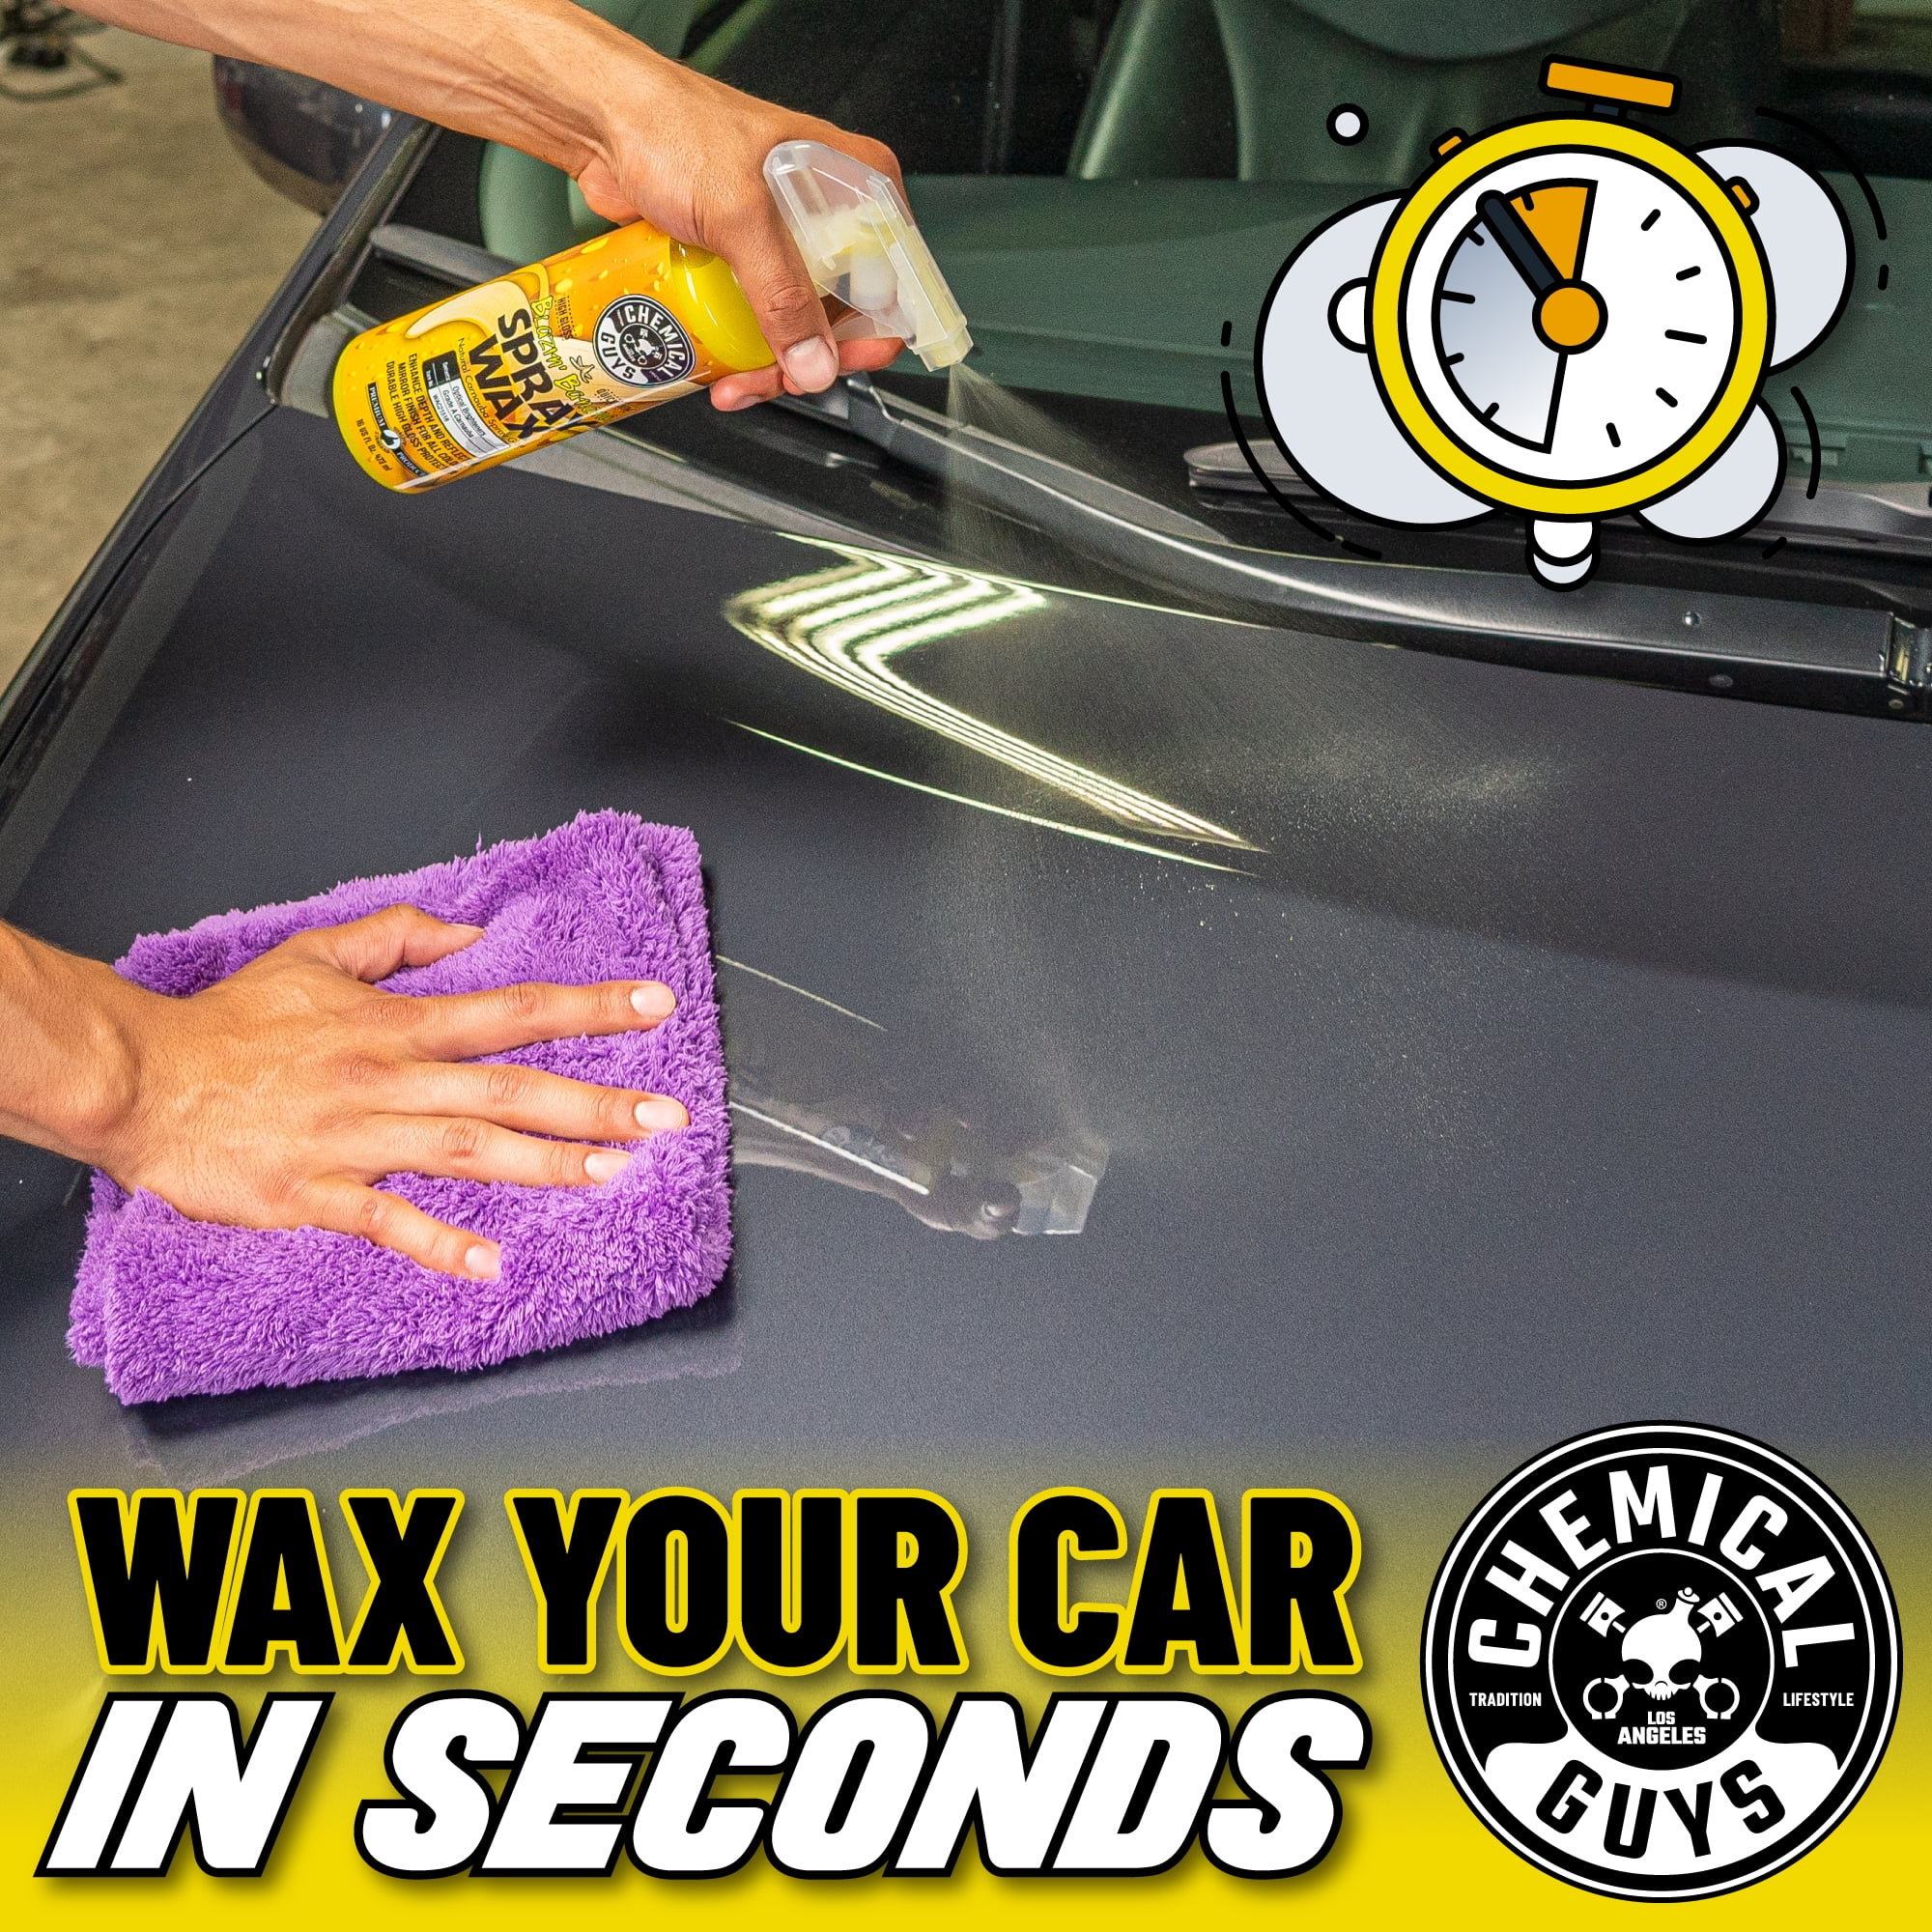 Chemical Guys on X: Have you tried Blazin Banana Spray Wax? Everyone loves  it! from @immaculater - Got the fiancé's Jeep all shined up with @ chemicalguys blazin banana spray wax. #chemicalguys #detailgarage #